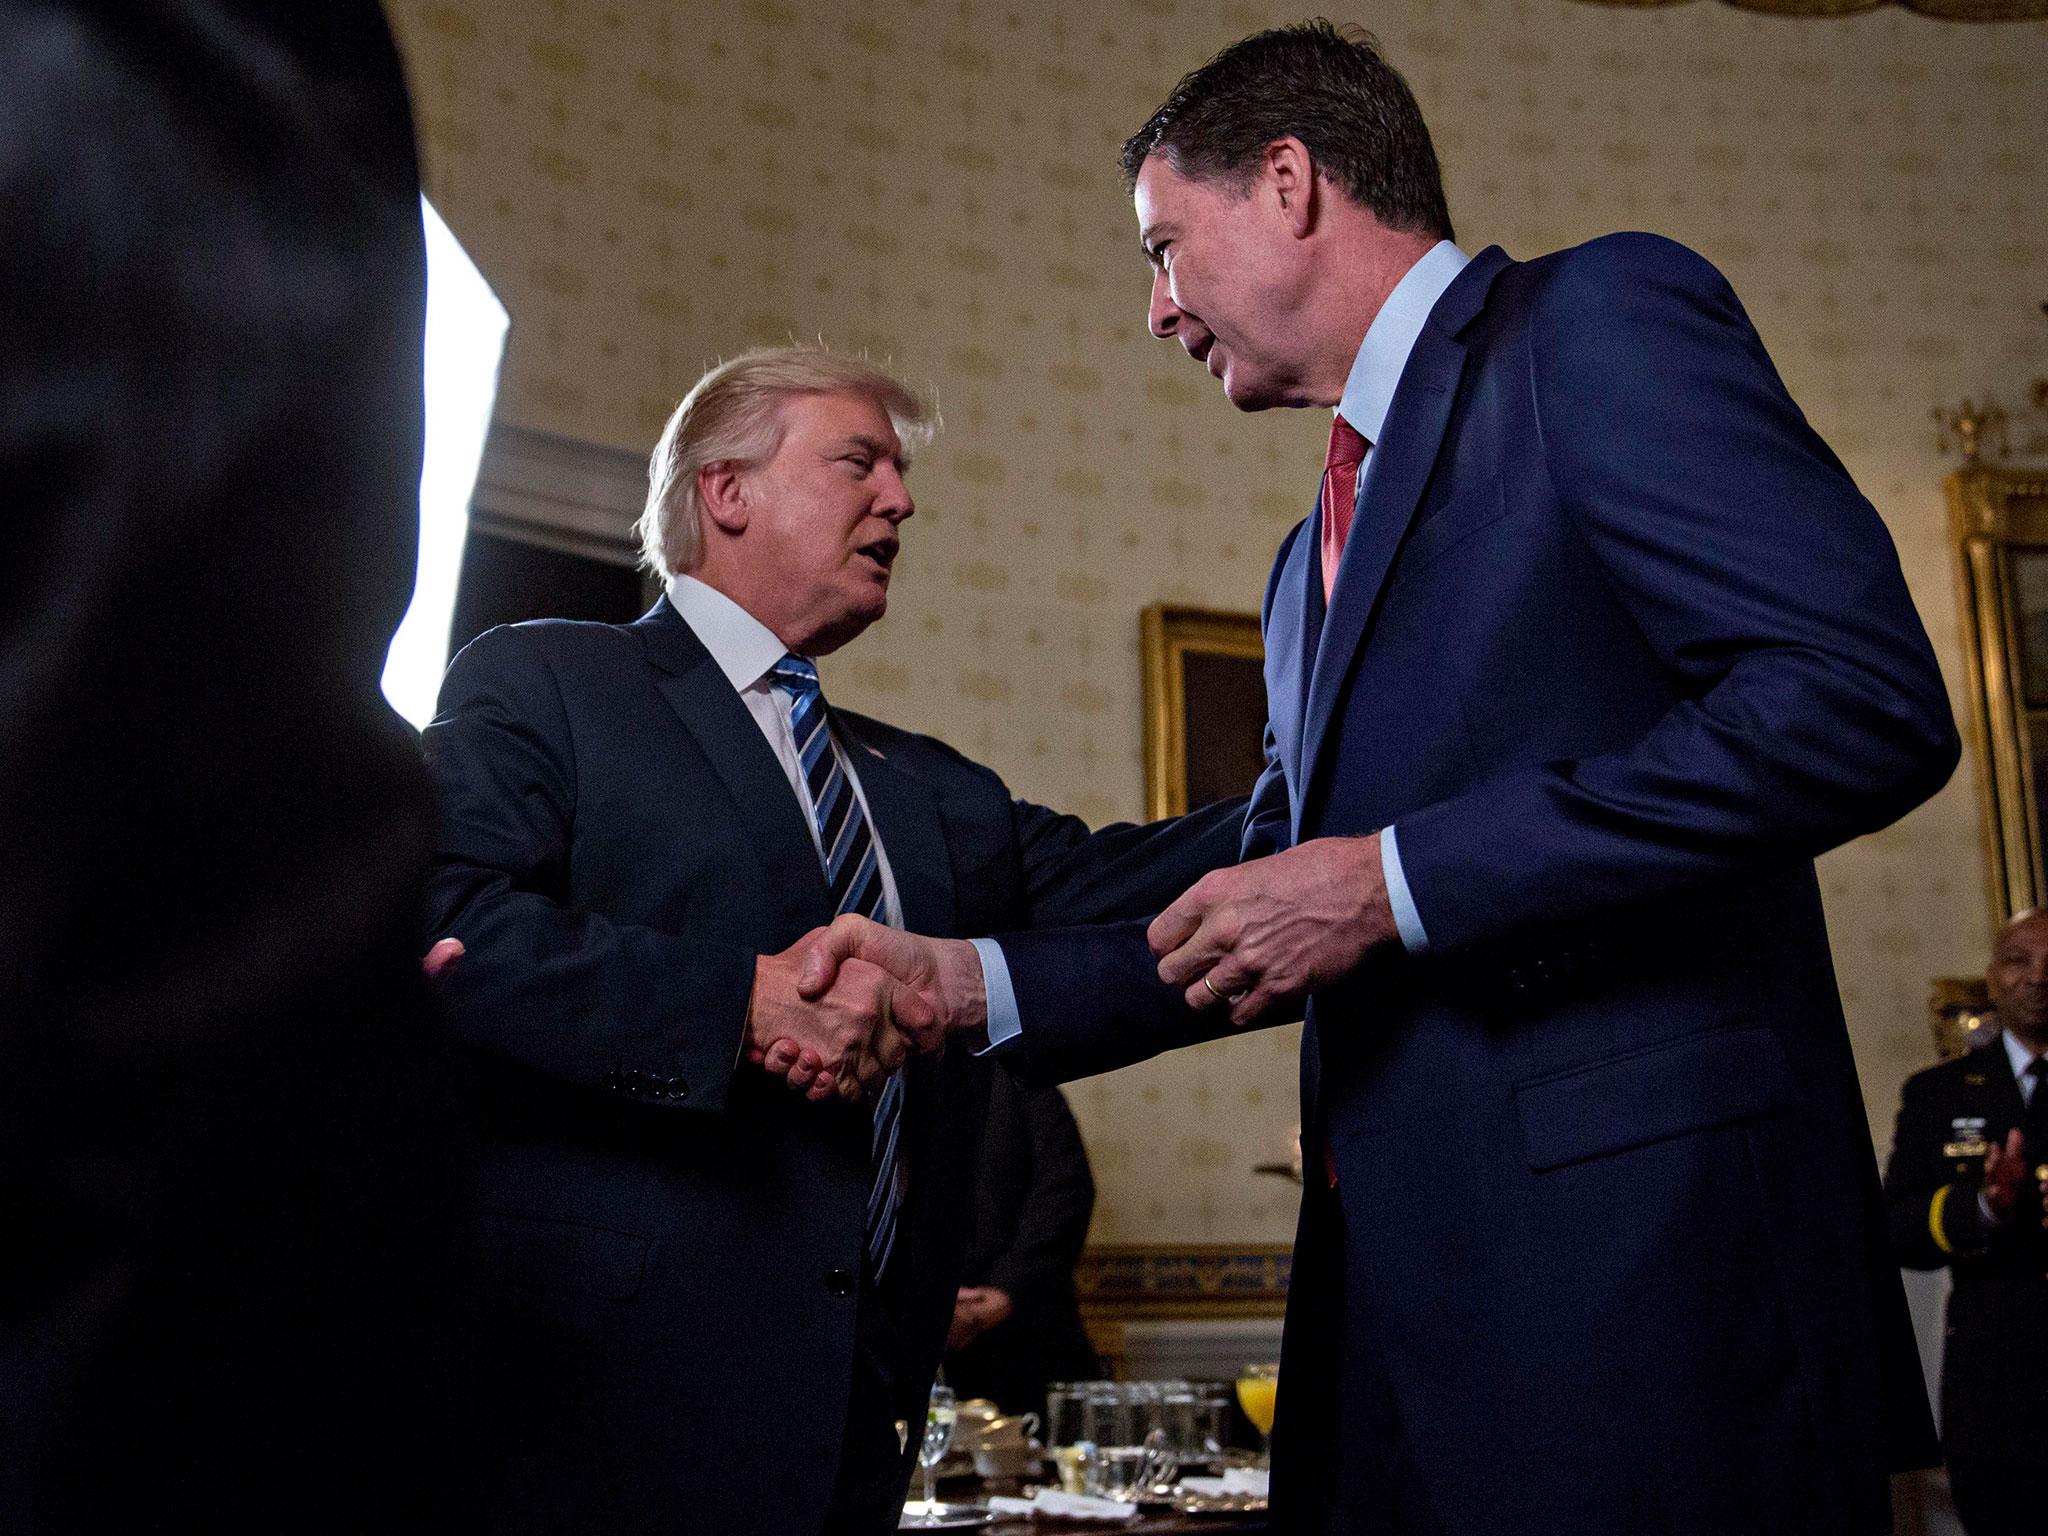 Donald Trump has hit out at former FBI director James Comey on Twitter